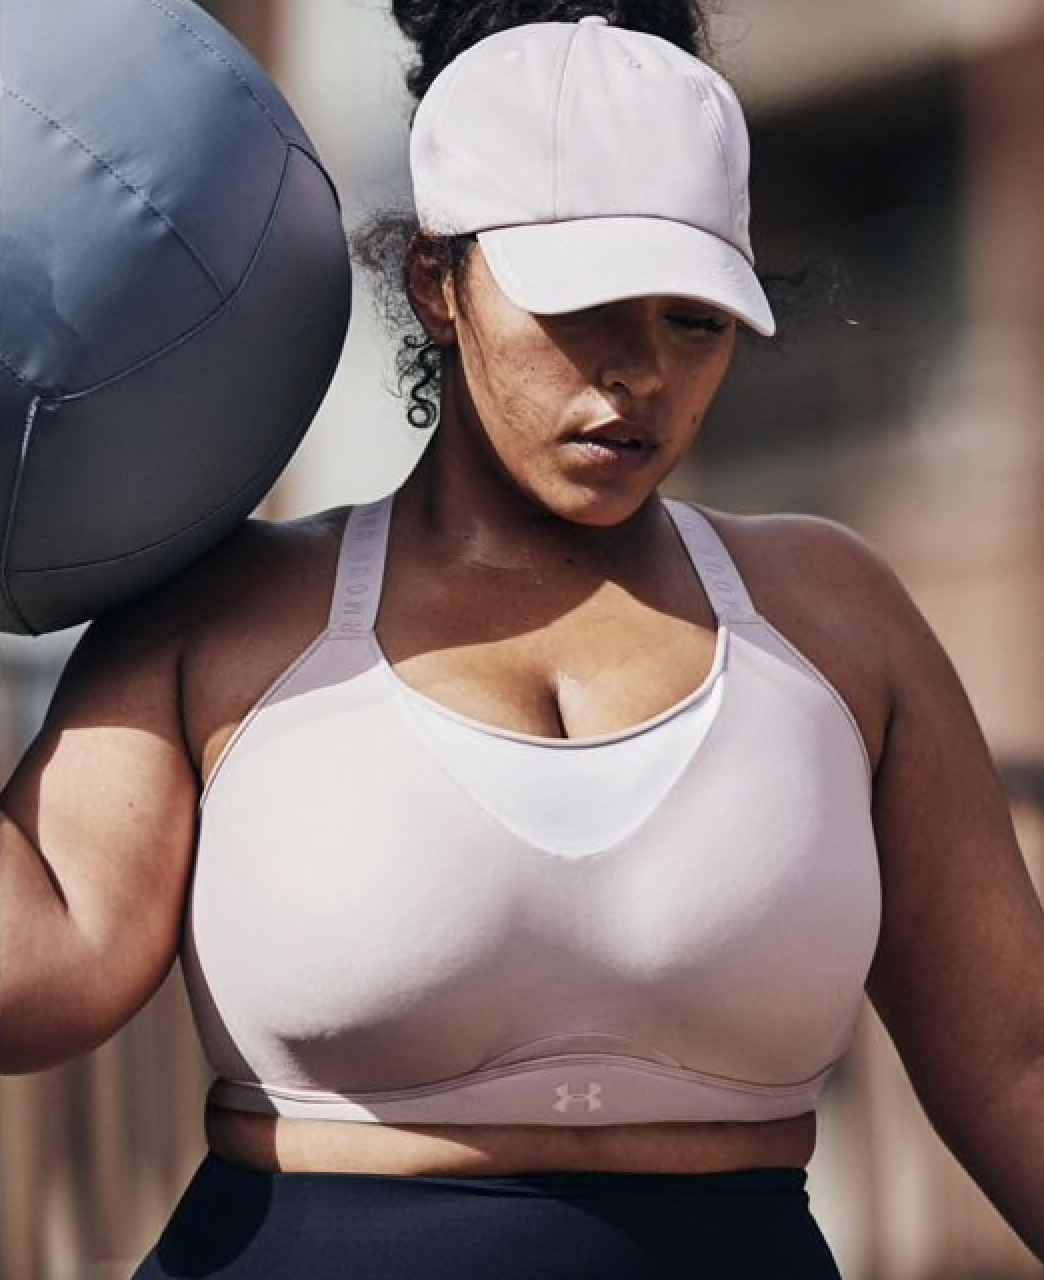 Sports Bras For Bigger Boobs, The Soothe